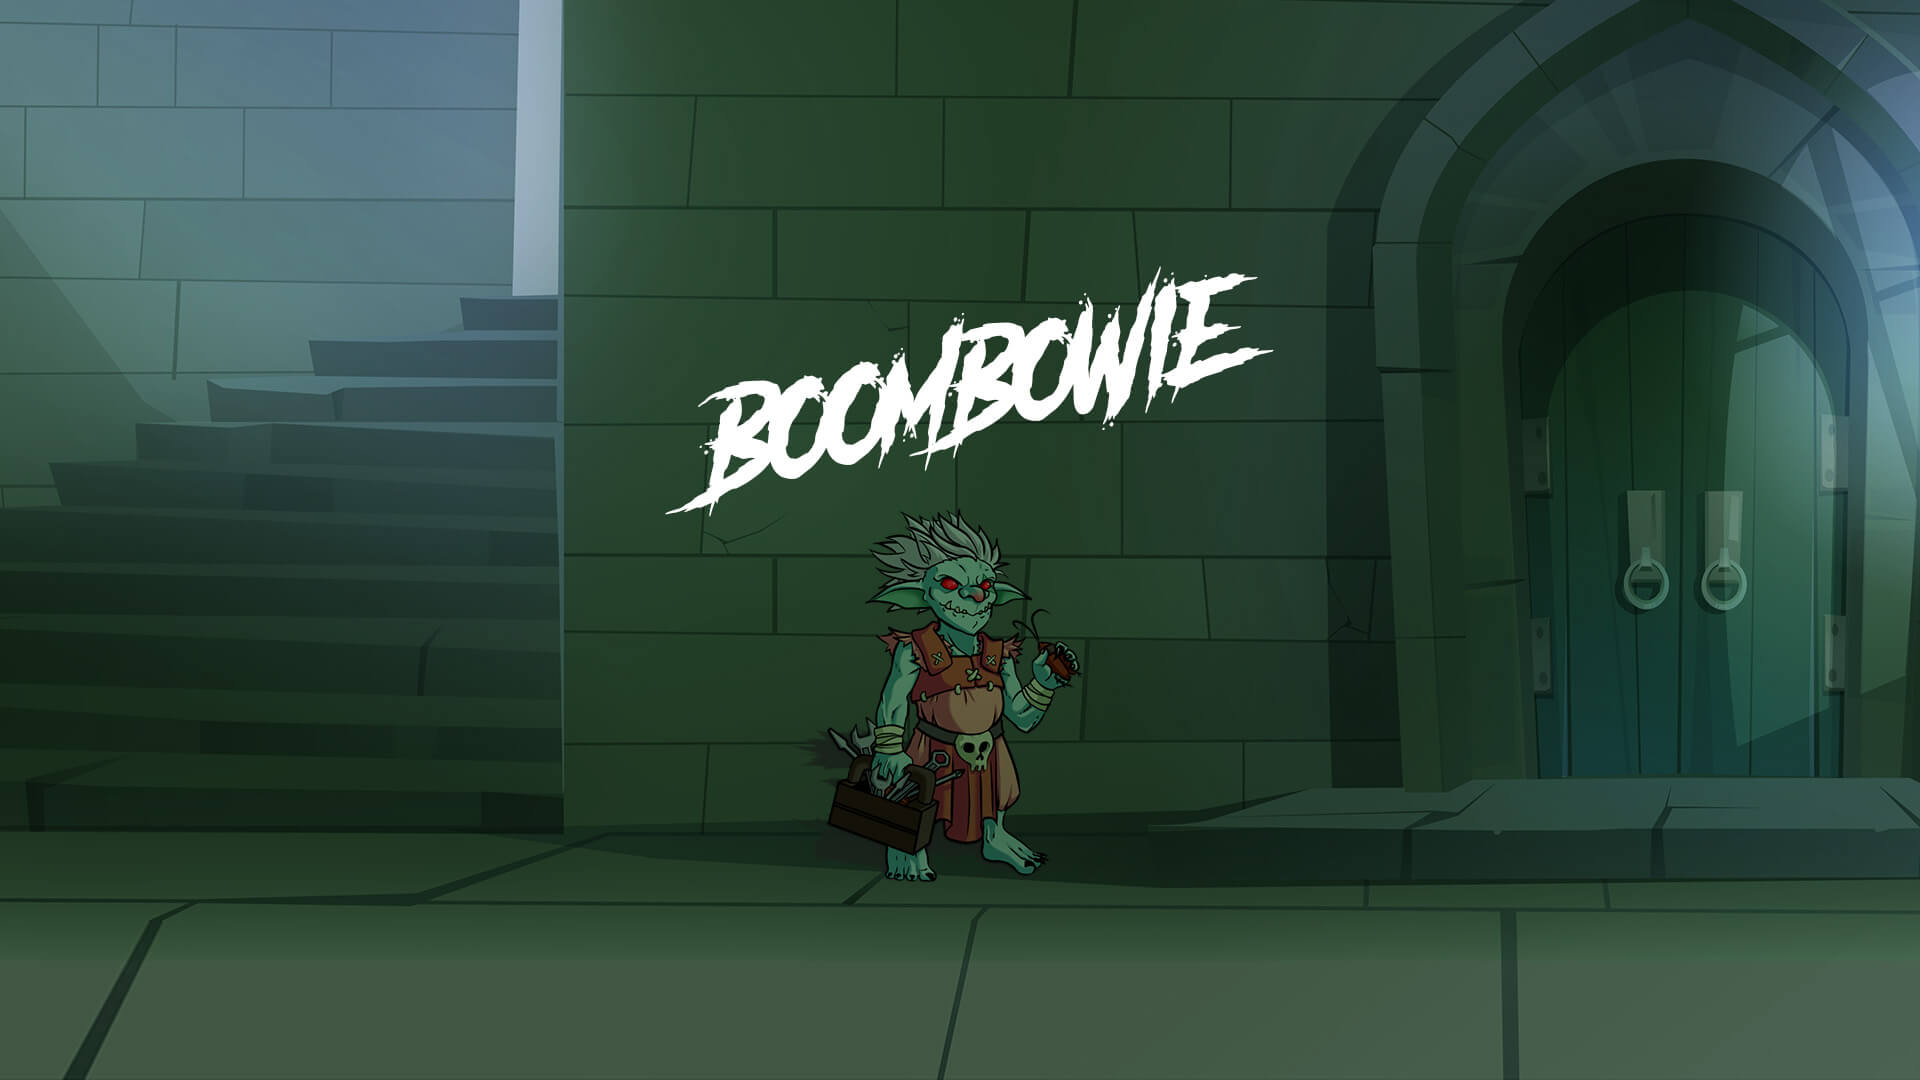 BommBowie